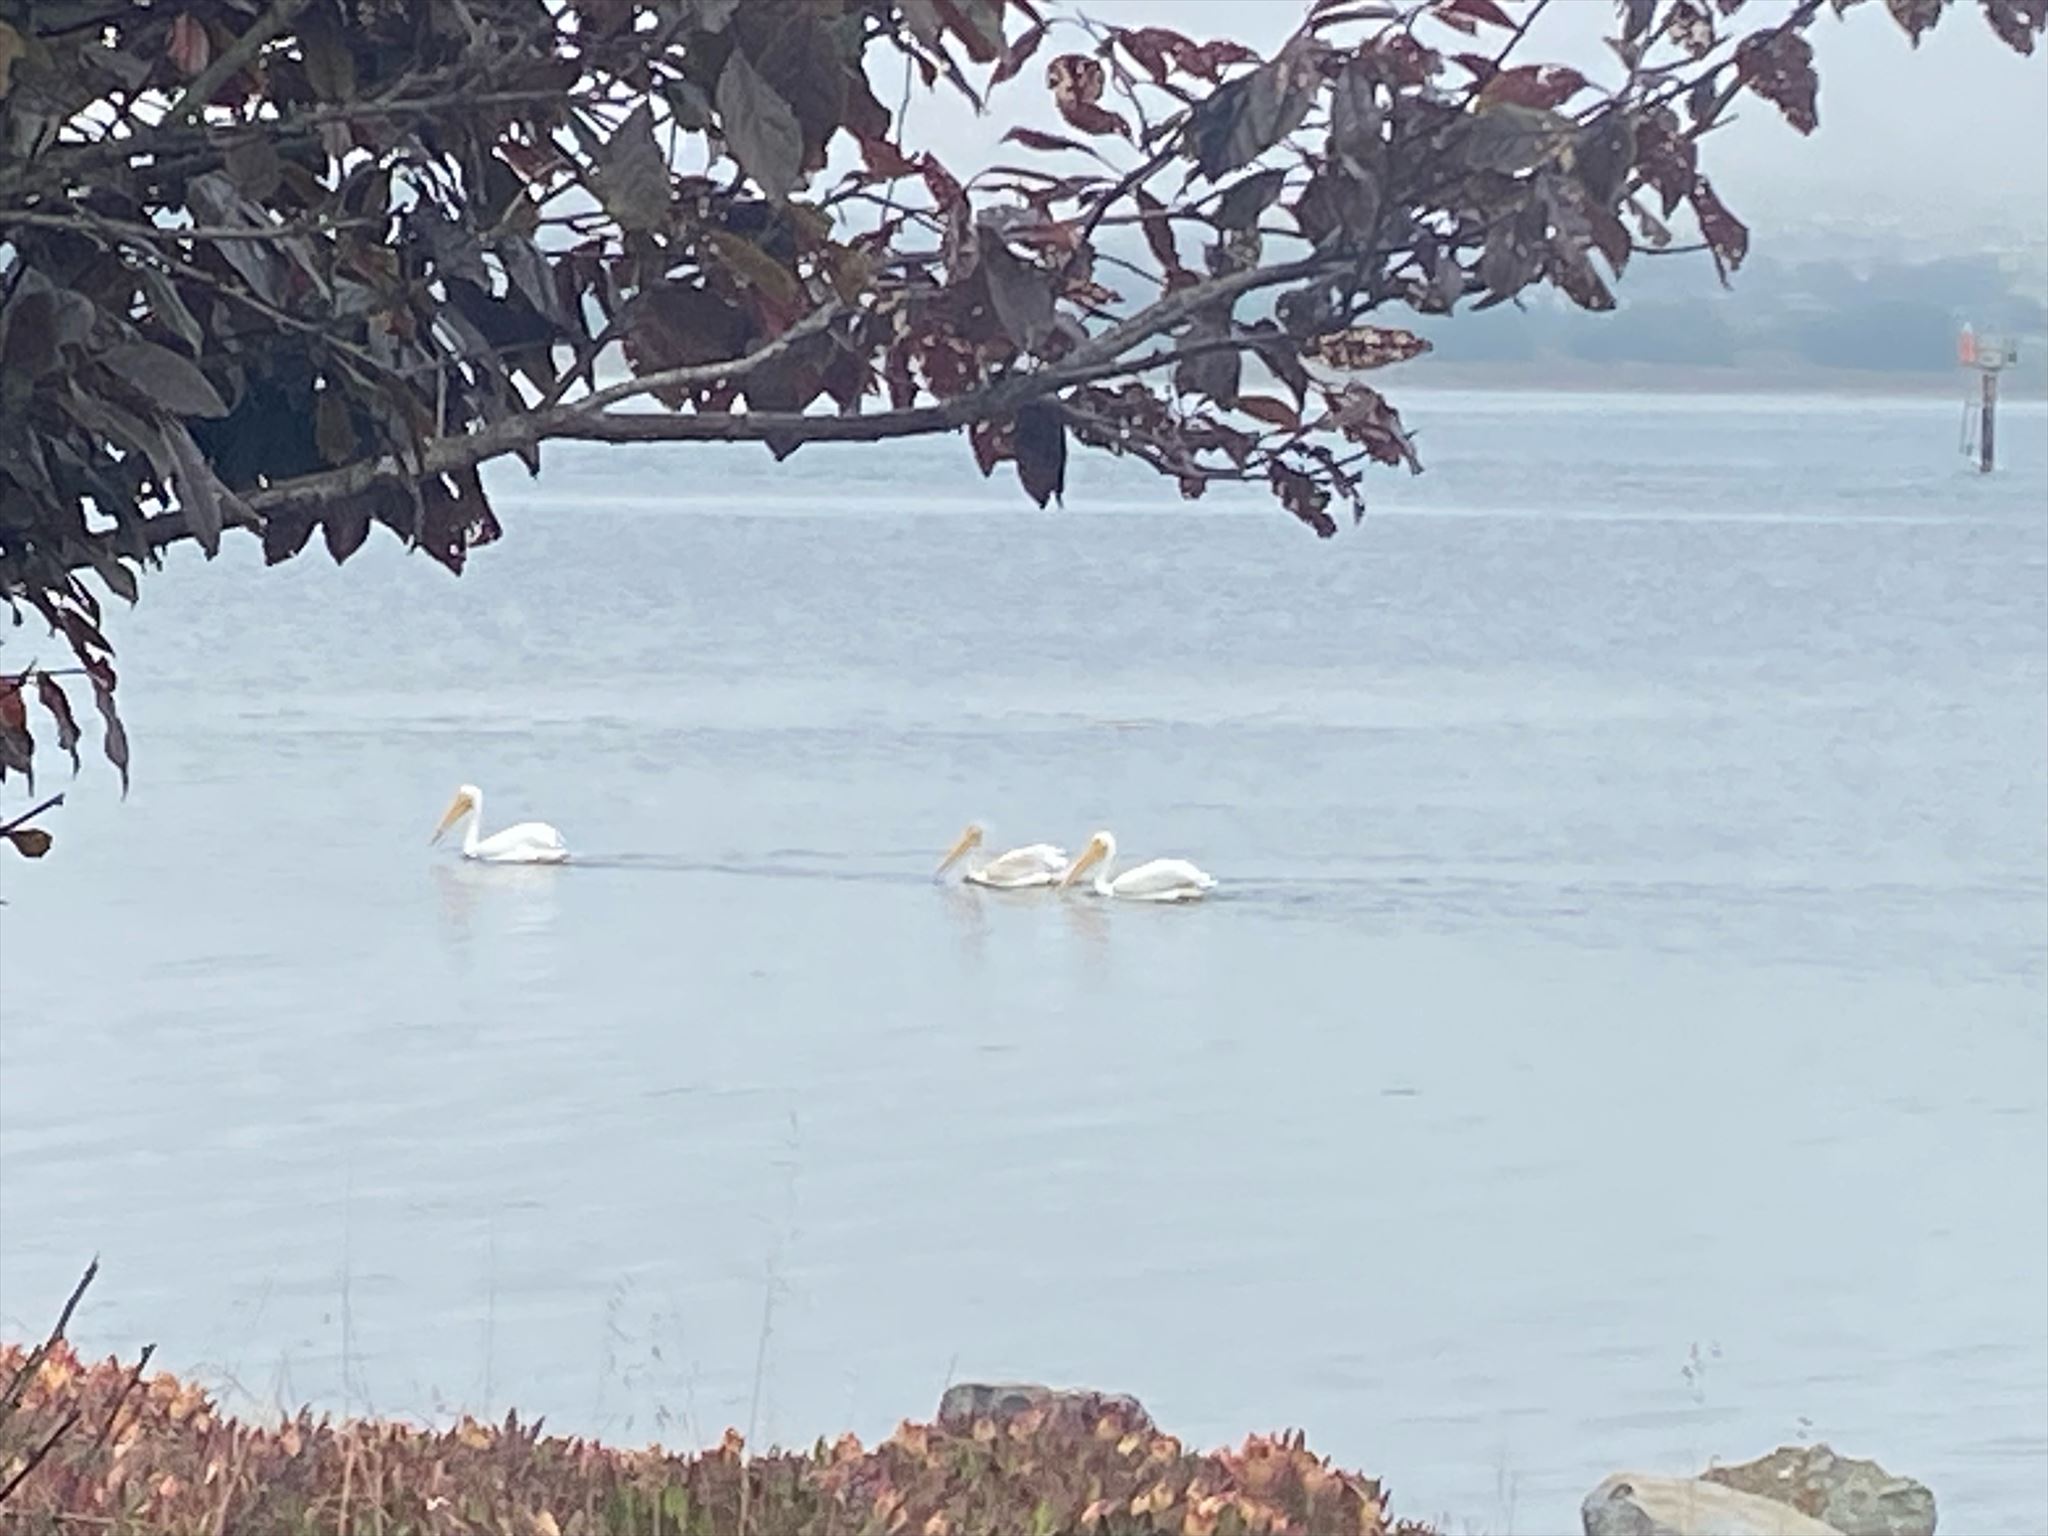 White pelicans on the Bay